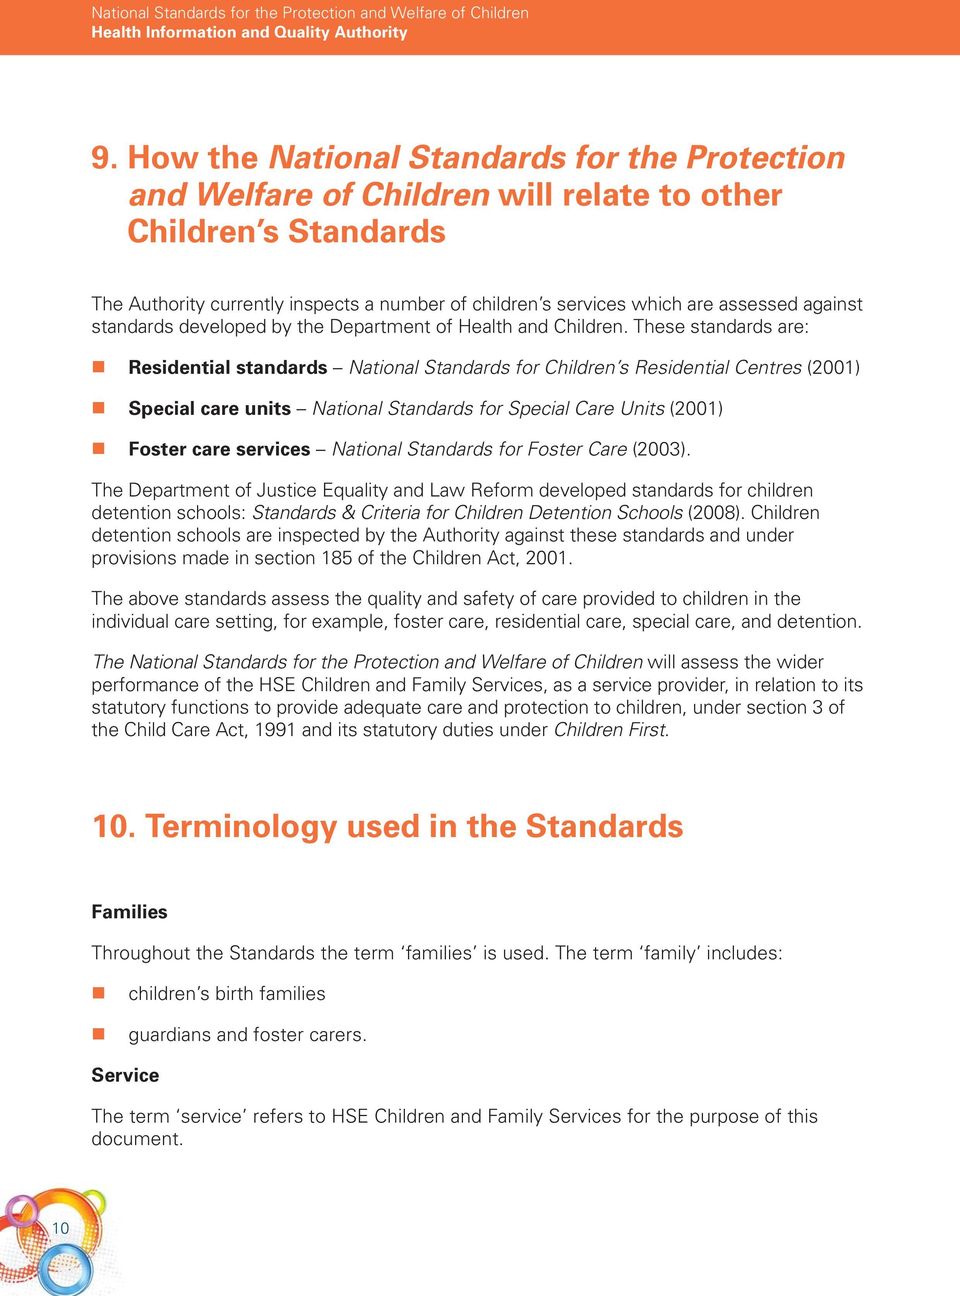 These standards are: Residential standards National Standards for Children s Residential Centres (2001) Special care units National Standards for Special Care Units (2001) Foster care services